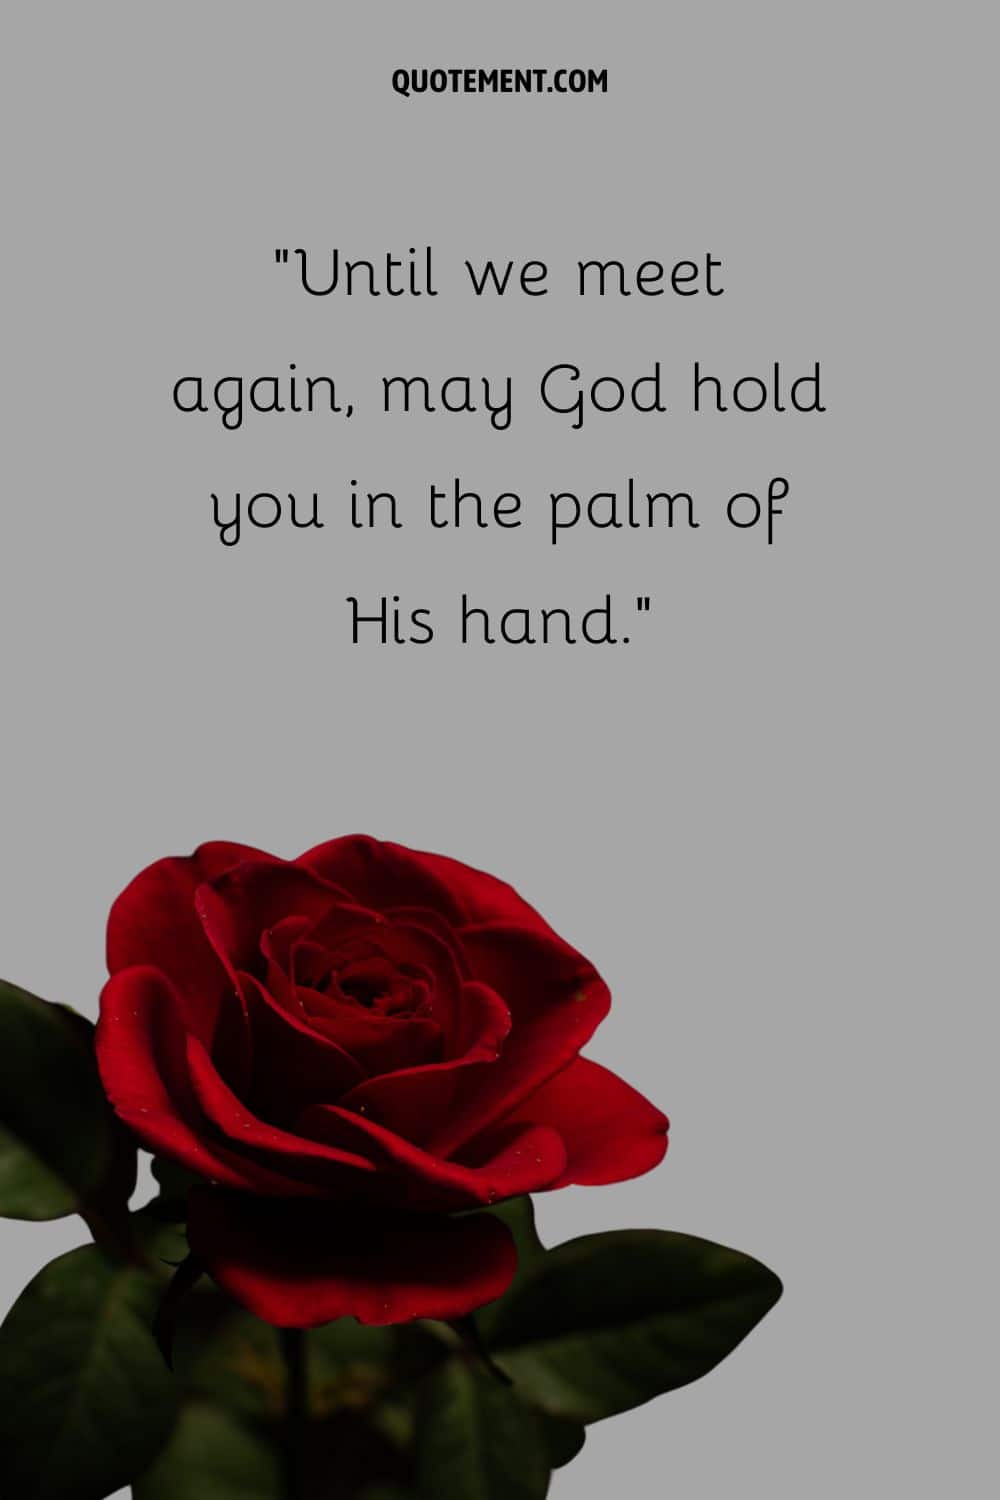 Words of remembrance represented by the image of a red rose.